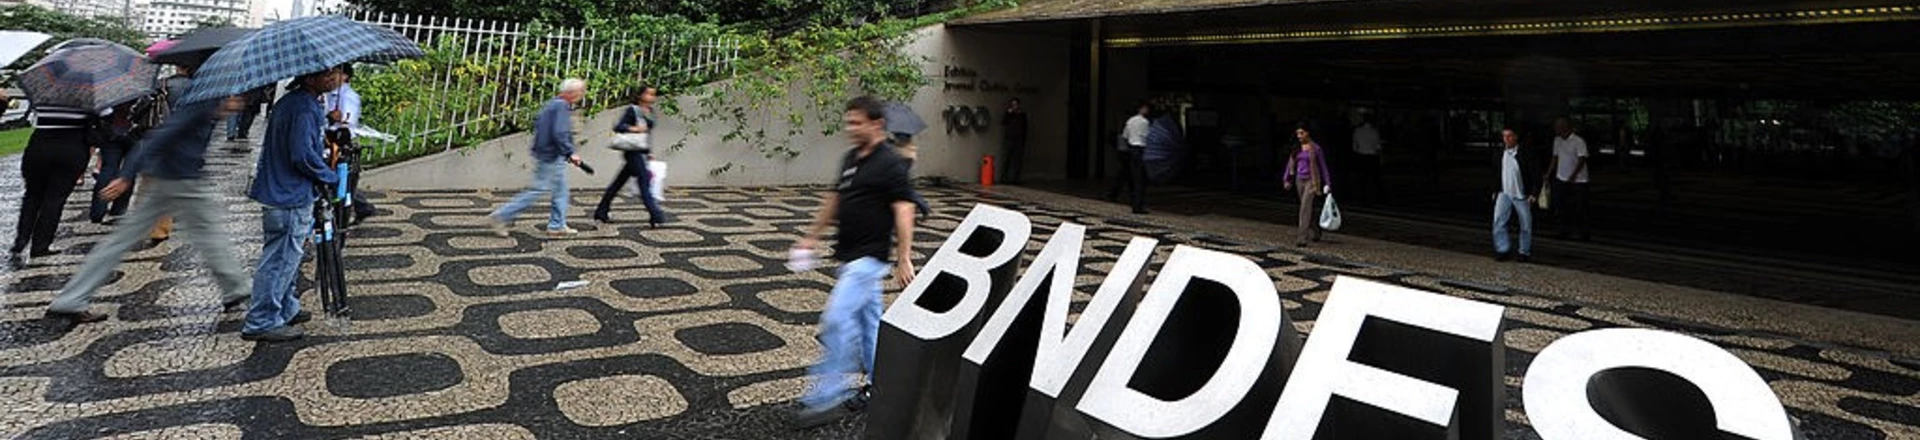 The main entrance to the state-owned Brazilian Development Bank (BNDES) in Rio de Janeiro, Brazil, on July 4, 2011. The BNDES will support the fusion of Carrefour and CBD-Pao de Acucar in Brazil only if all sides involved, included Casino, agree to do it in a "friendly" and "without litigation" way. French supermarket giants Carrefour and Casino traded further blows Monday over their operations in Brazil, a key market where both are claiming a tie-up with the same company. AFP PHOTO/VANDERLEI ALMEIDA (Photo credit should read VANDERLEI ALMEIDA/AFP/Getty Images)